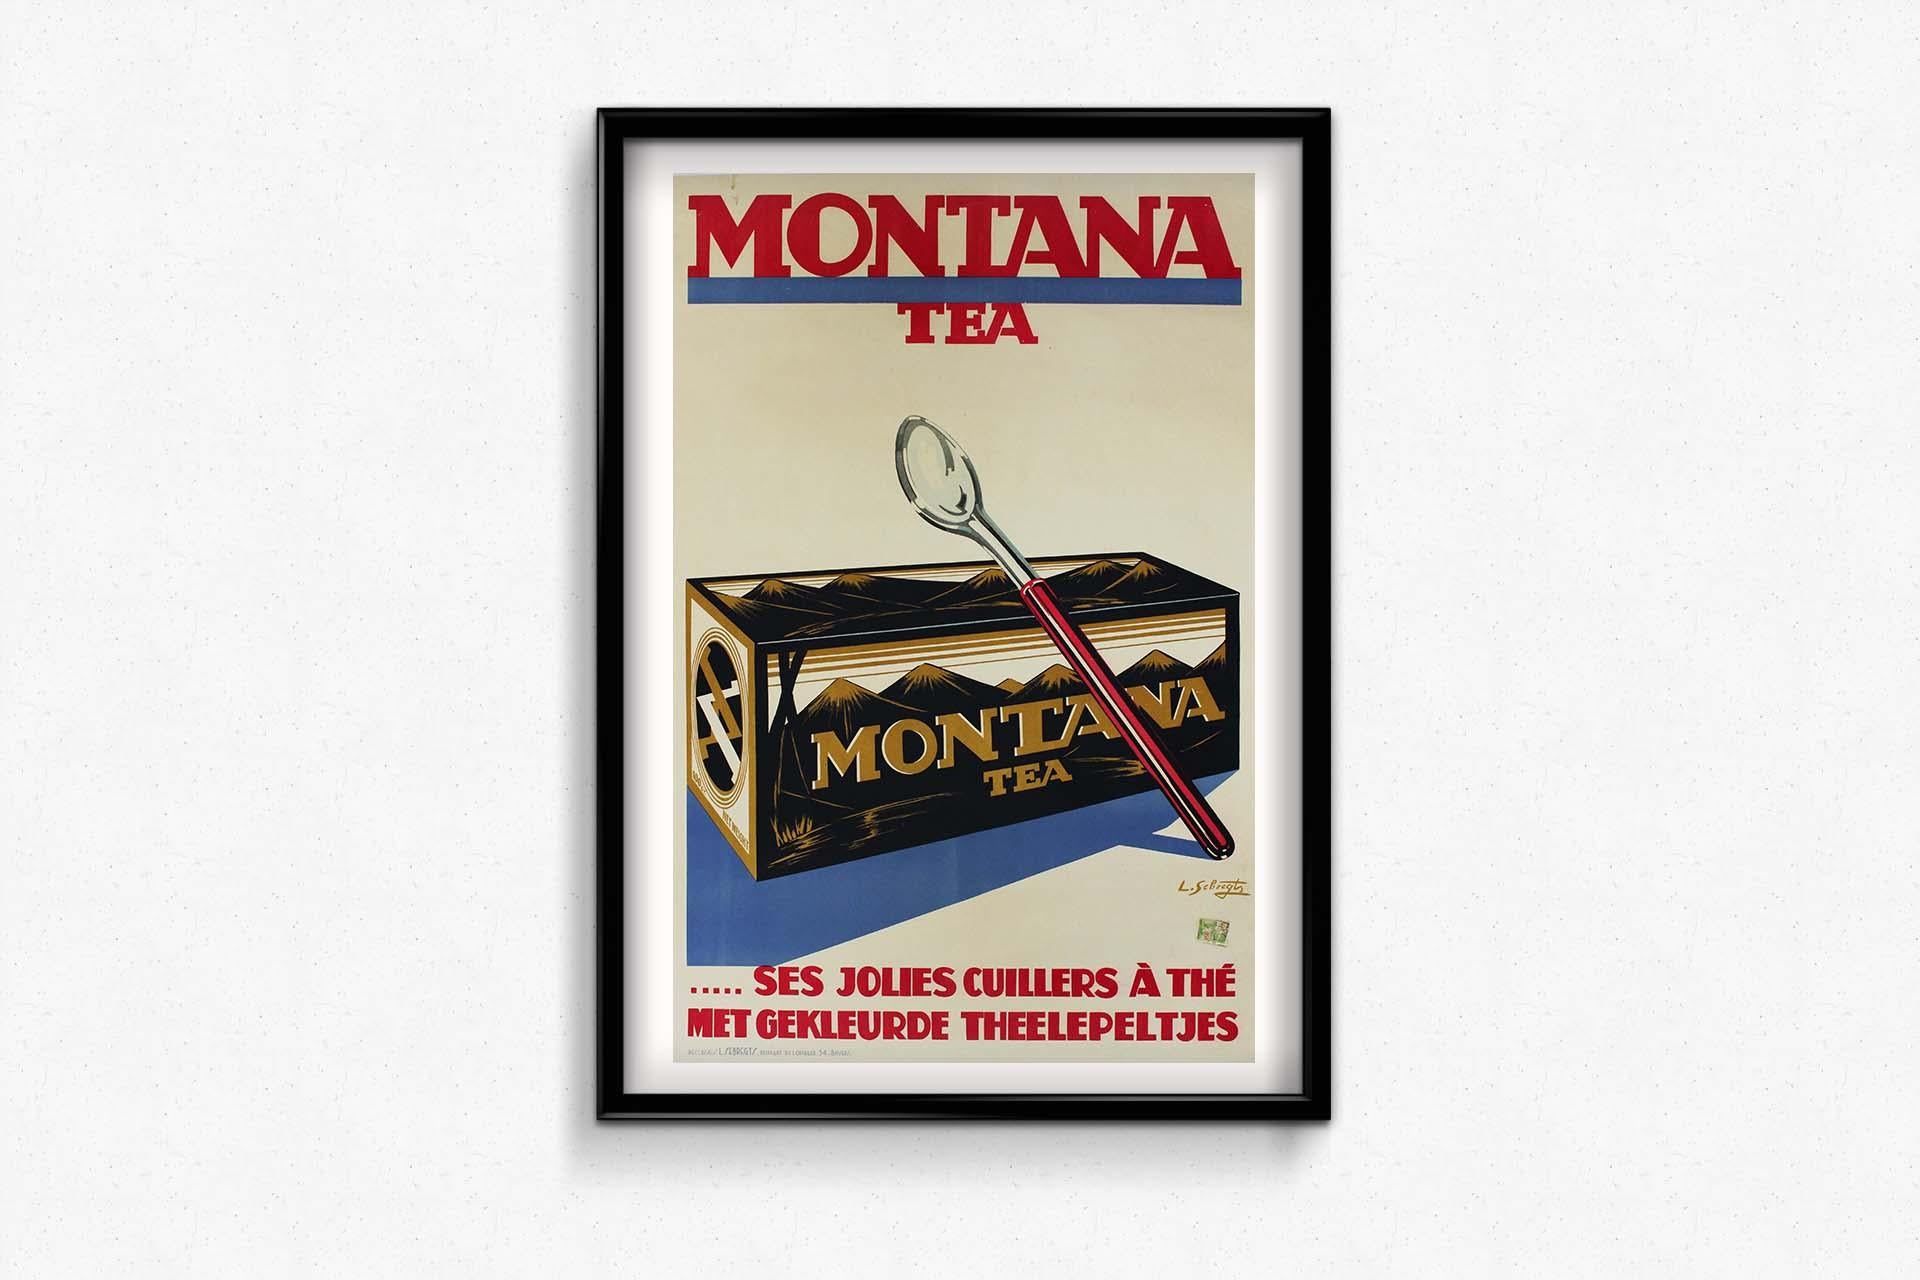 Sebregts' original 1930 creation for Montana Tea and its charming tea spoons stands as a delightful testament to the art of visual storytelling and the elegance inherent in tea culture. This iconic poster is not merely an advertisement but a